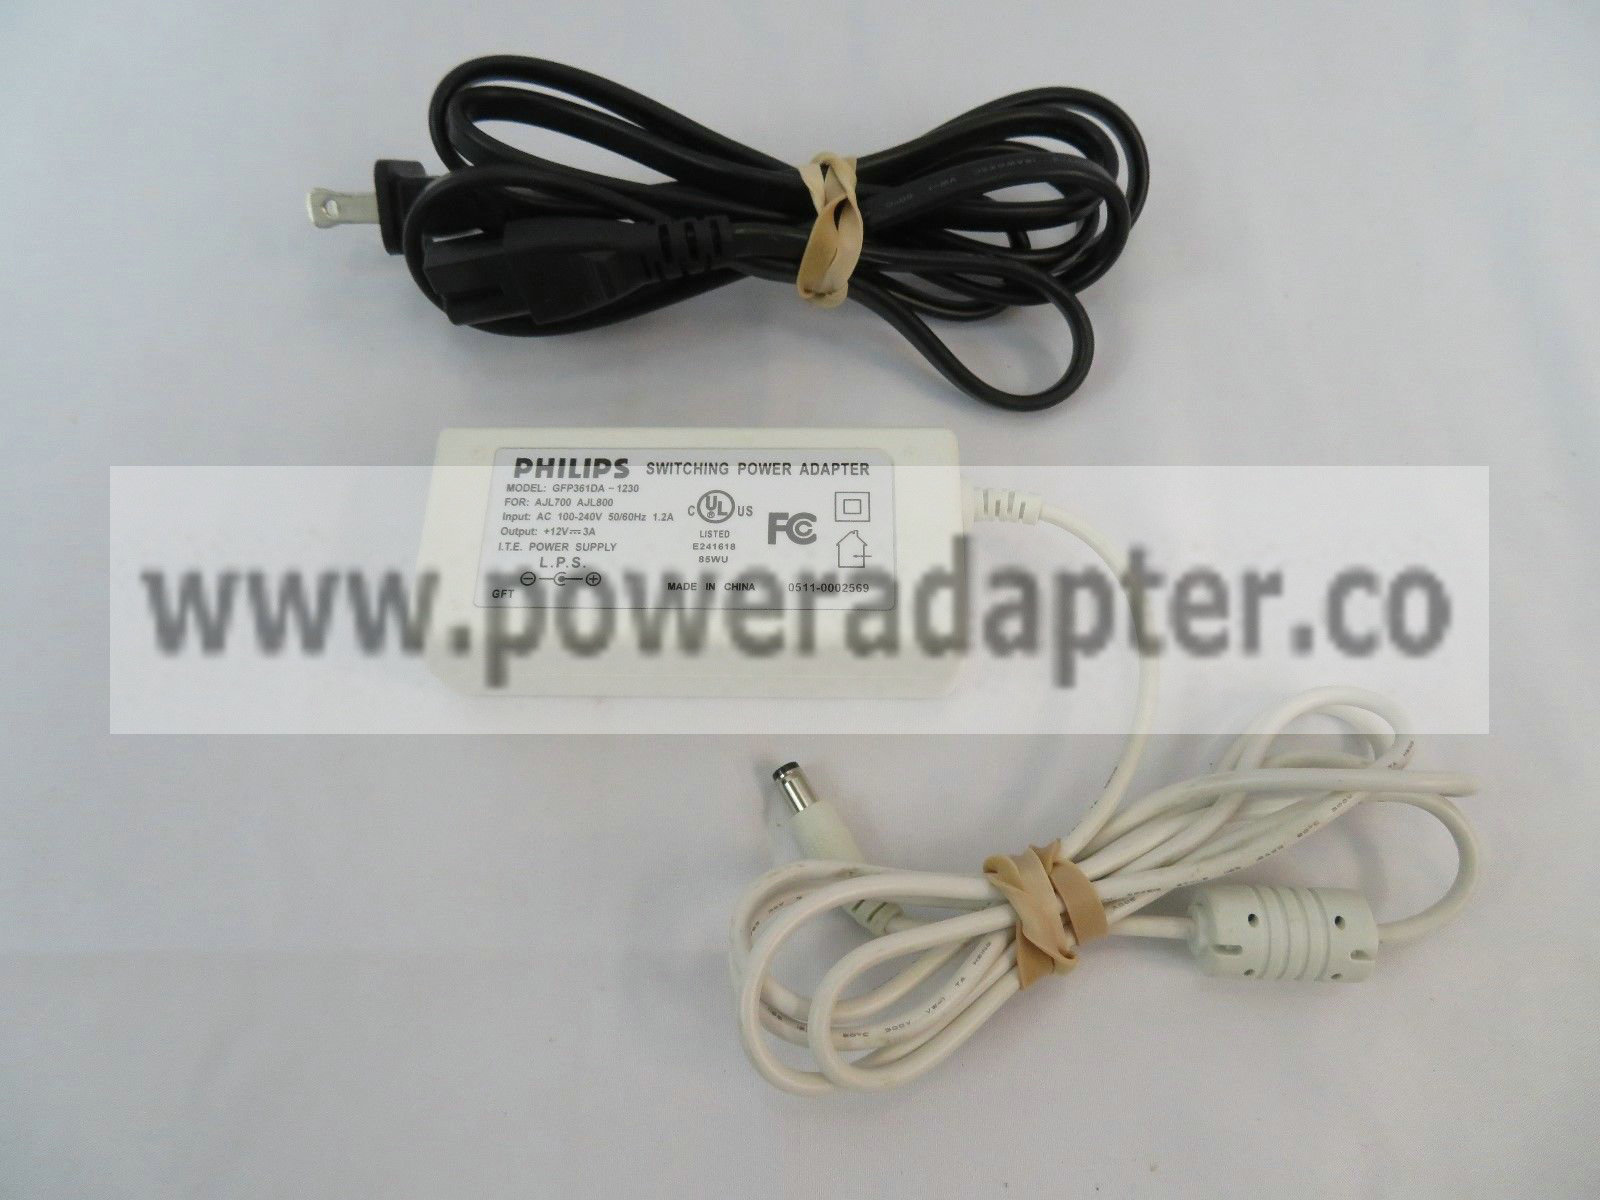 12V 3.0A AC Adapter for Philips GFP361DA-1230 LCD DVD TV Power Supply Cord Charger Brand: Philips Model no: GFP3